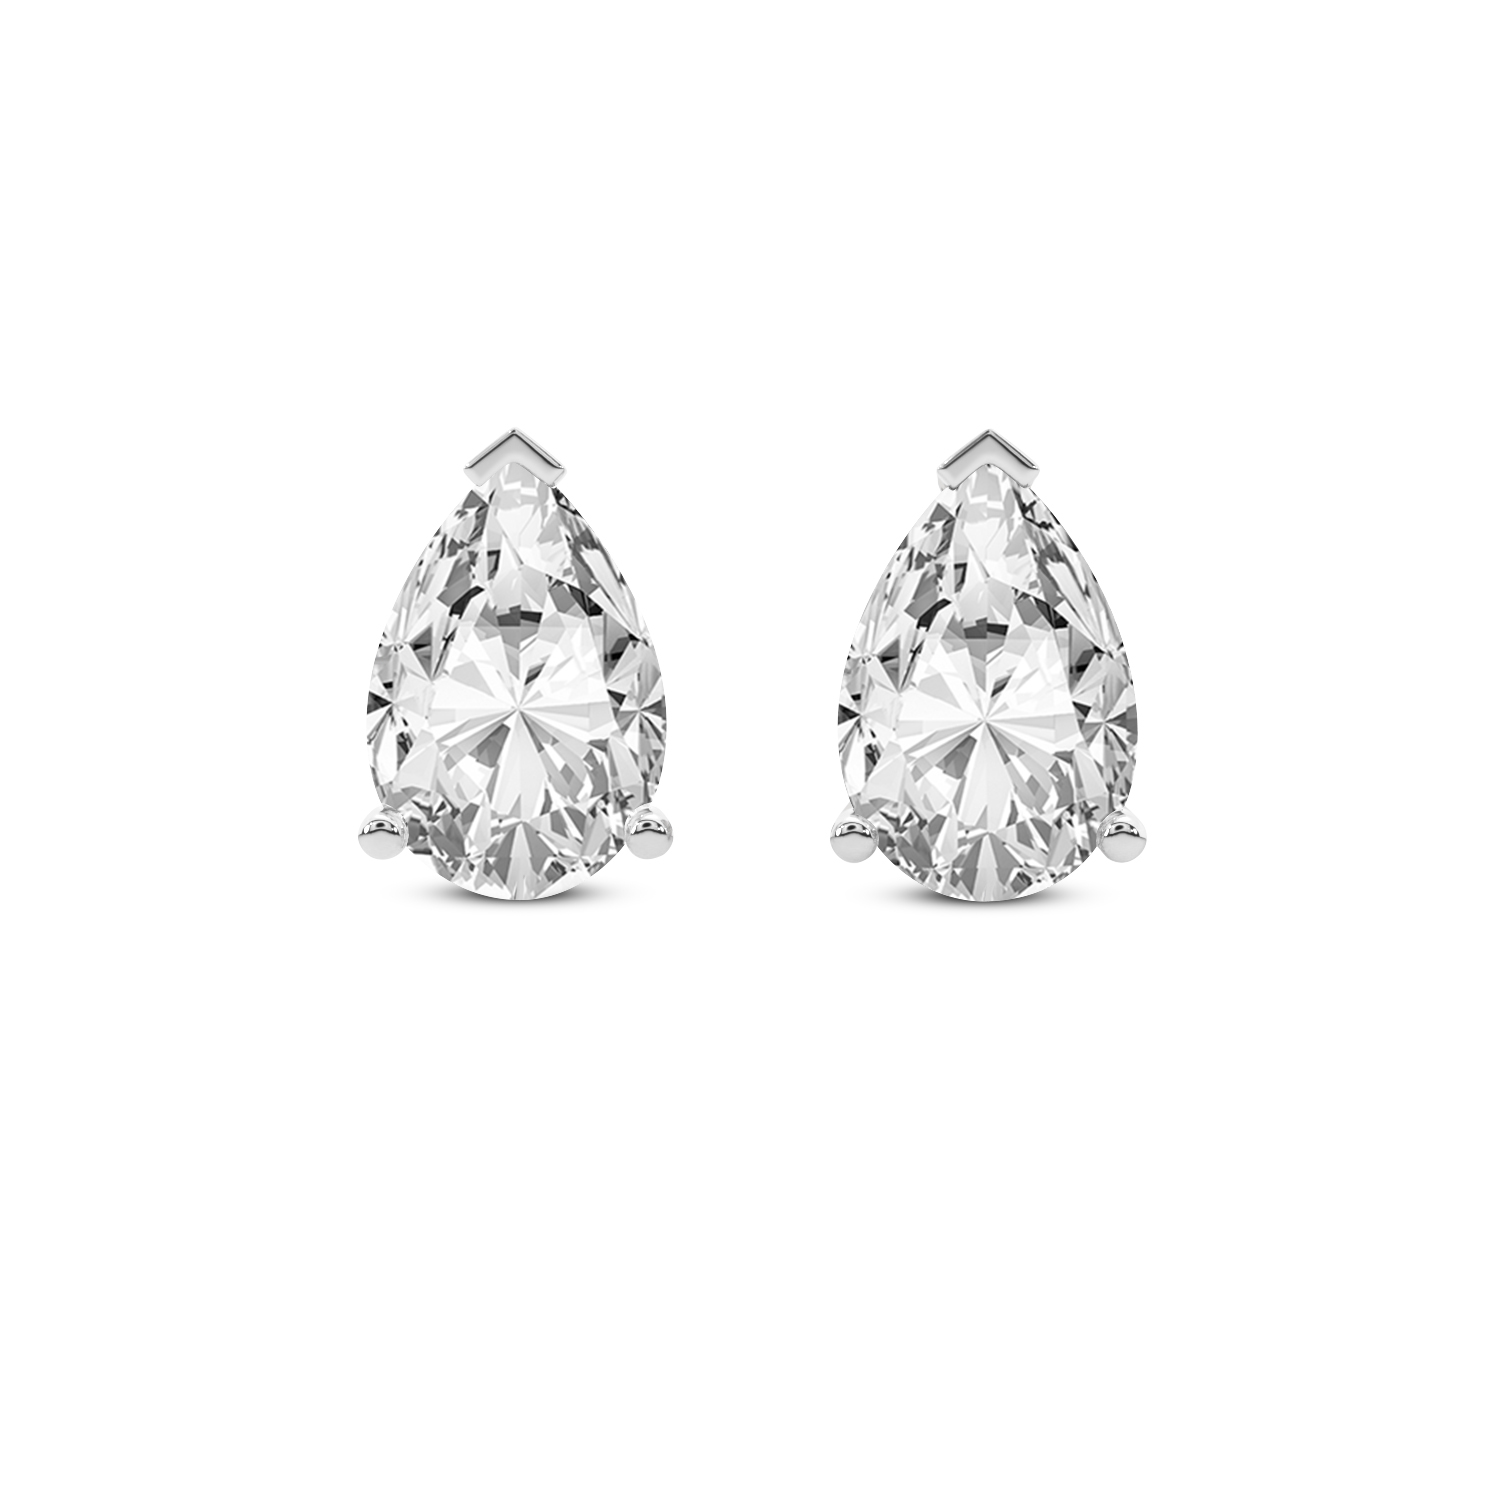 3 Prong Pear Lab Diamond Stud Earrings white gold earring, small front view